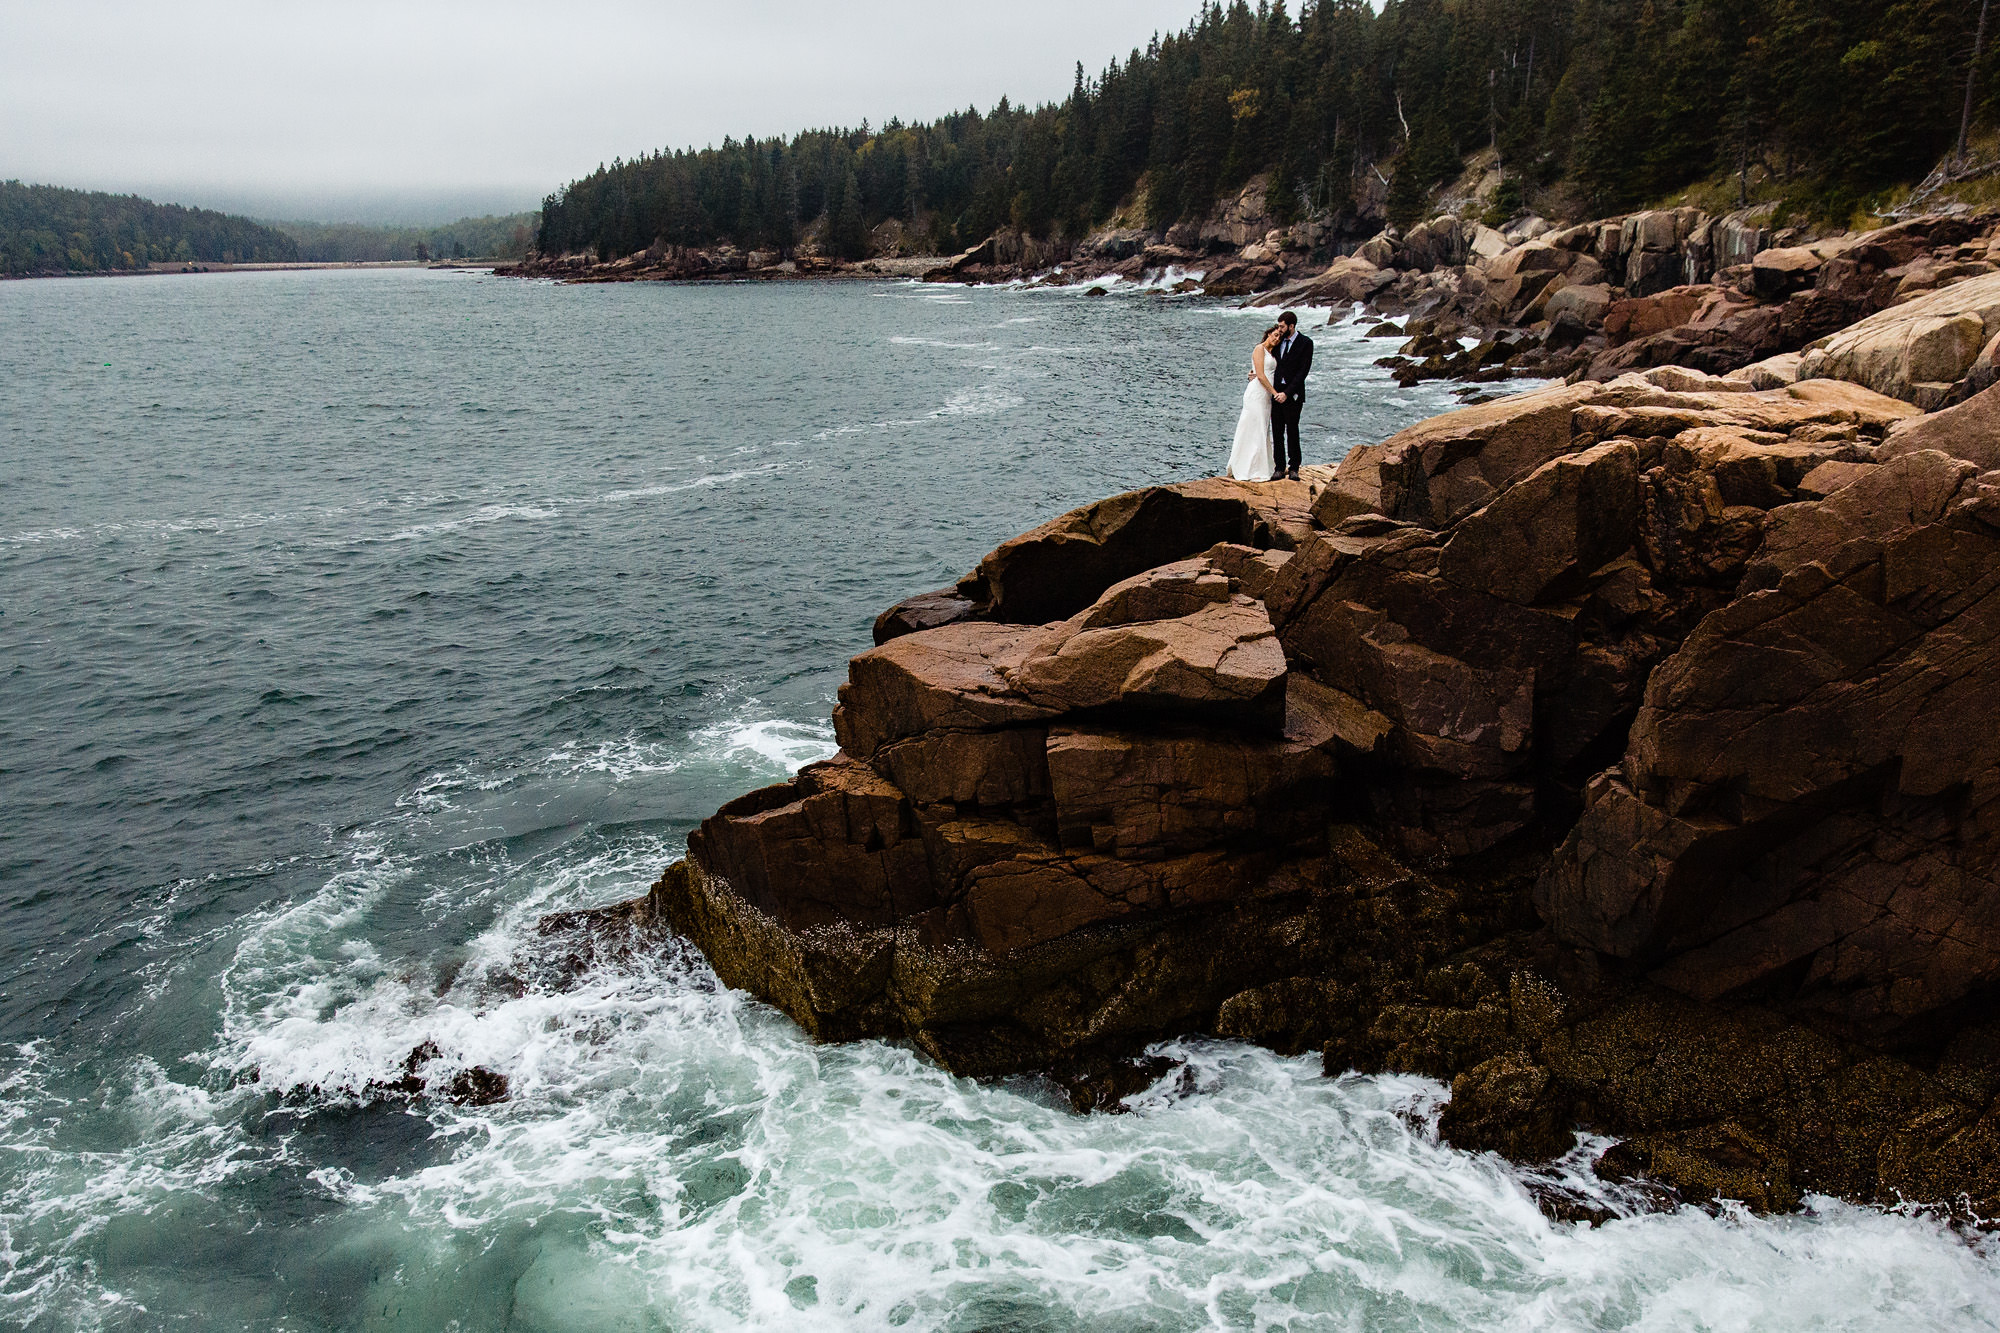 A dramatic portrait at Otter Point in Acadia National Park